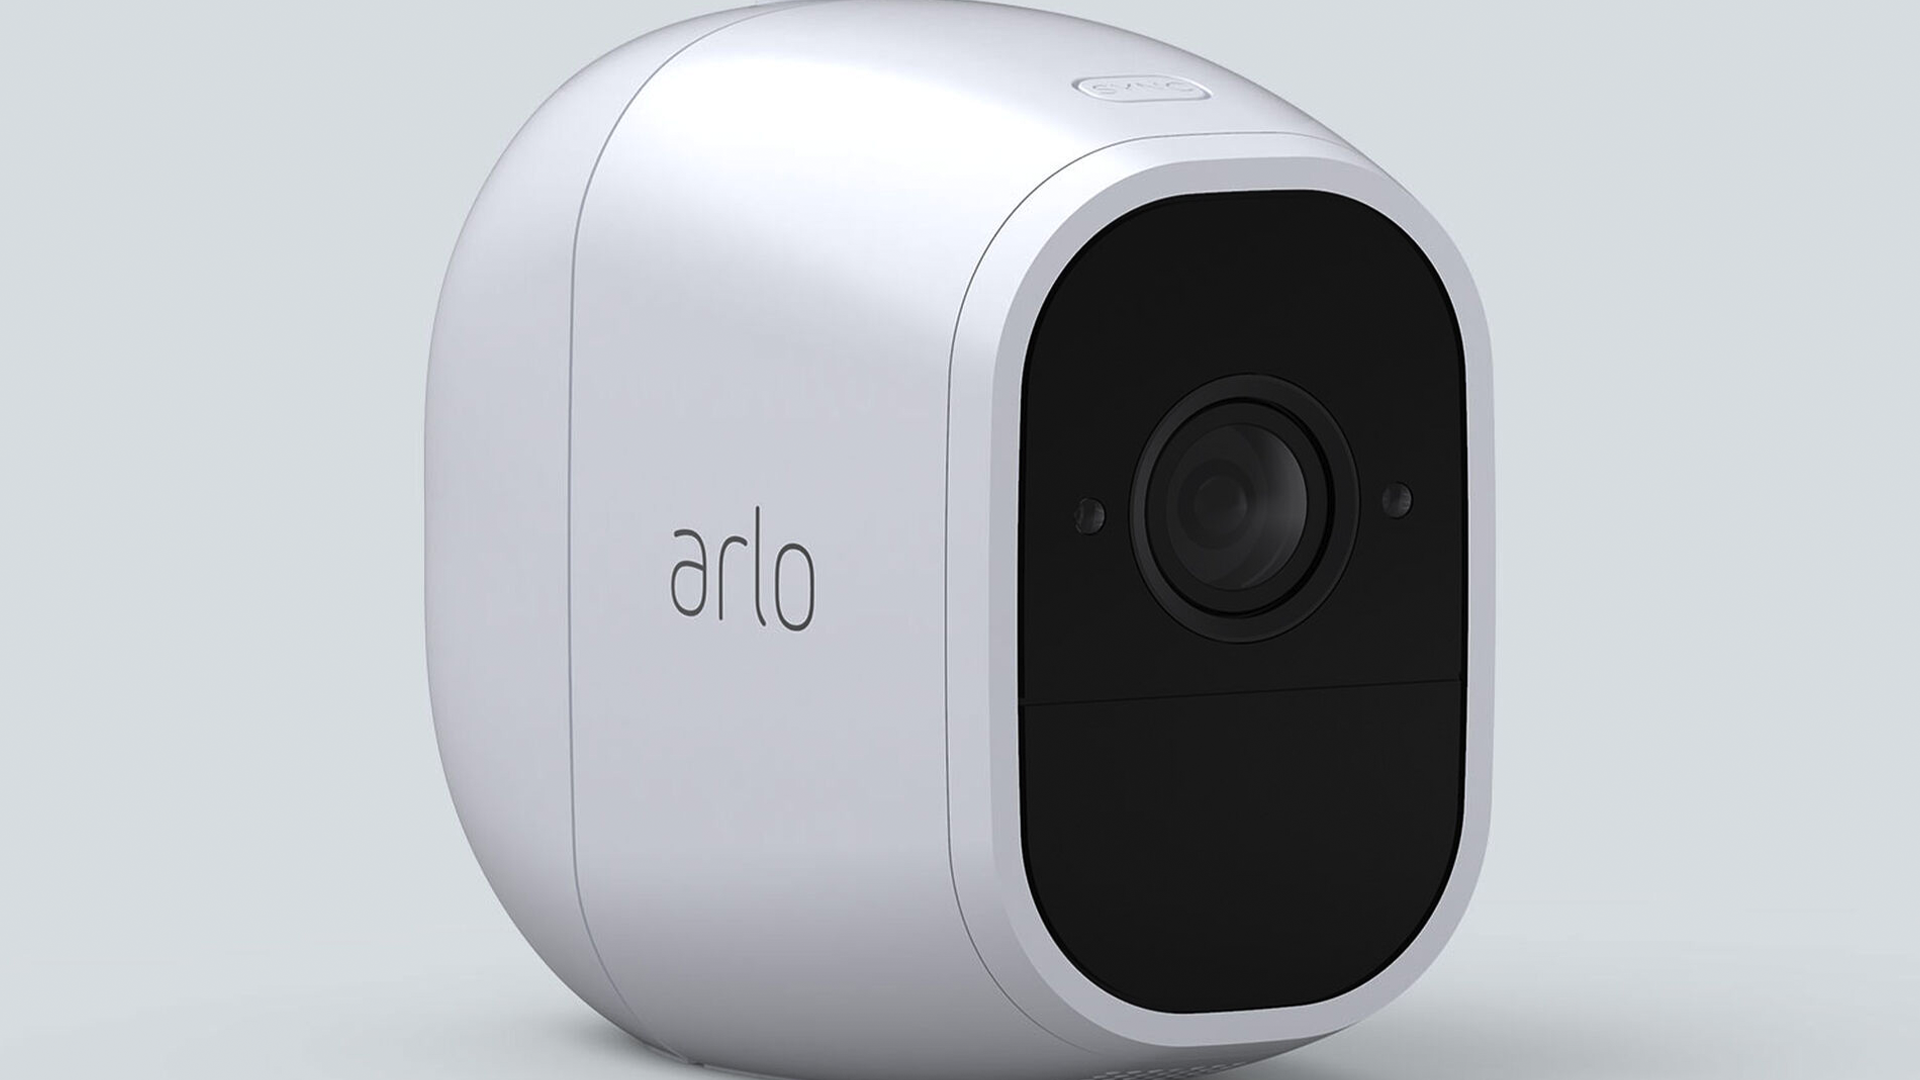 Arlo will stop supporting some of its older security cameras